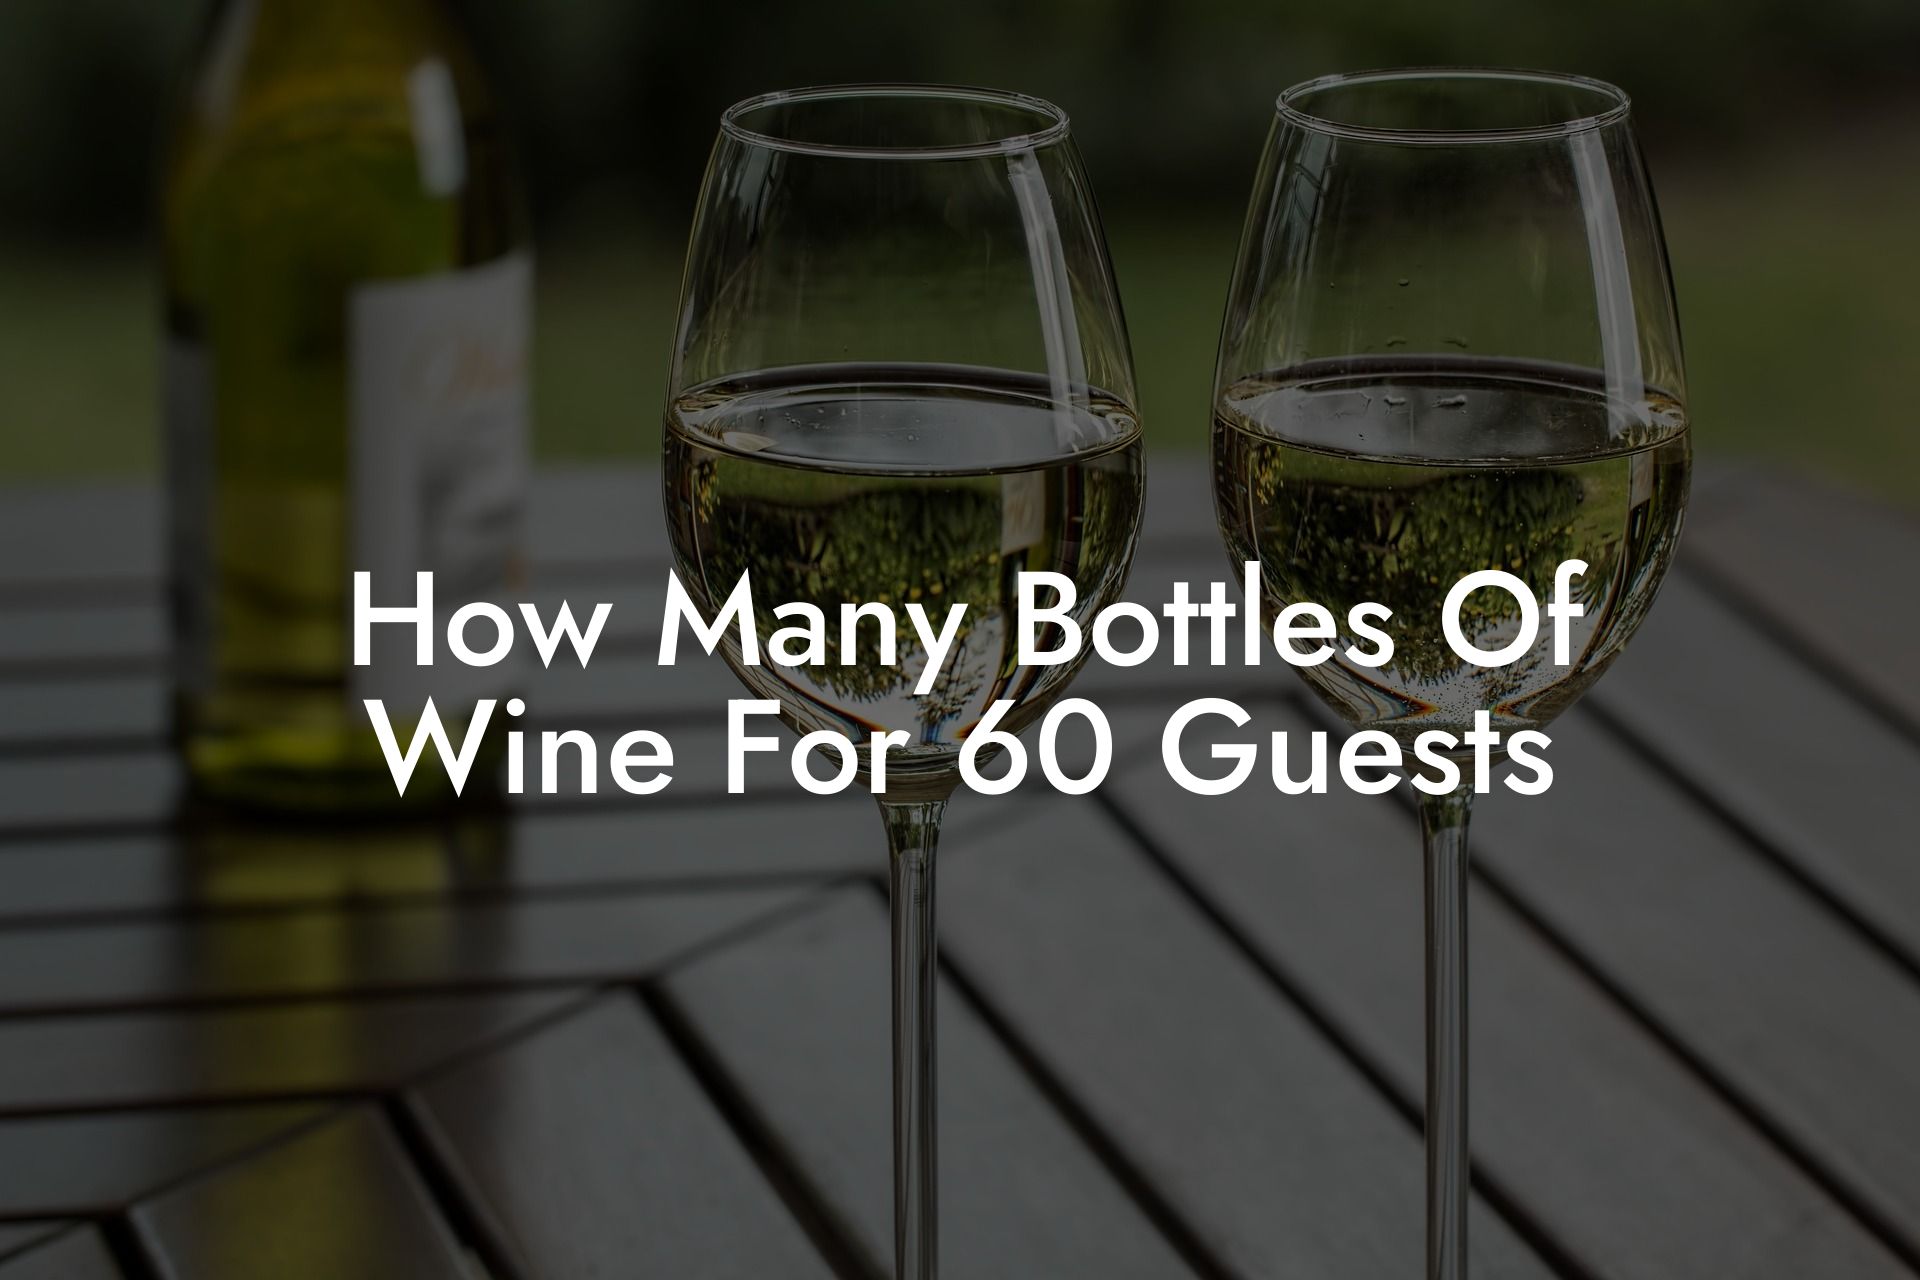 How Many Bottles Of Wine For 60 Guests